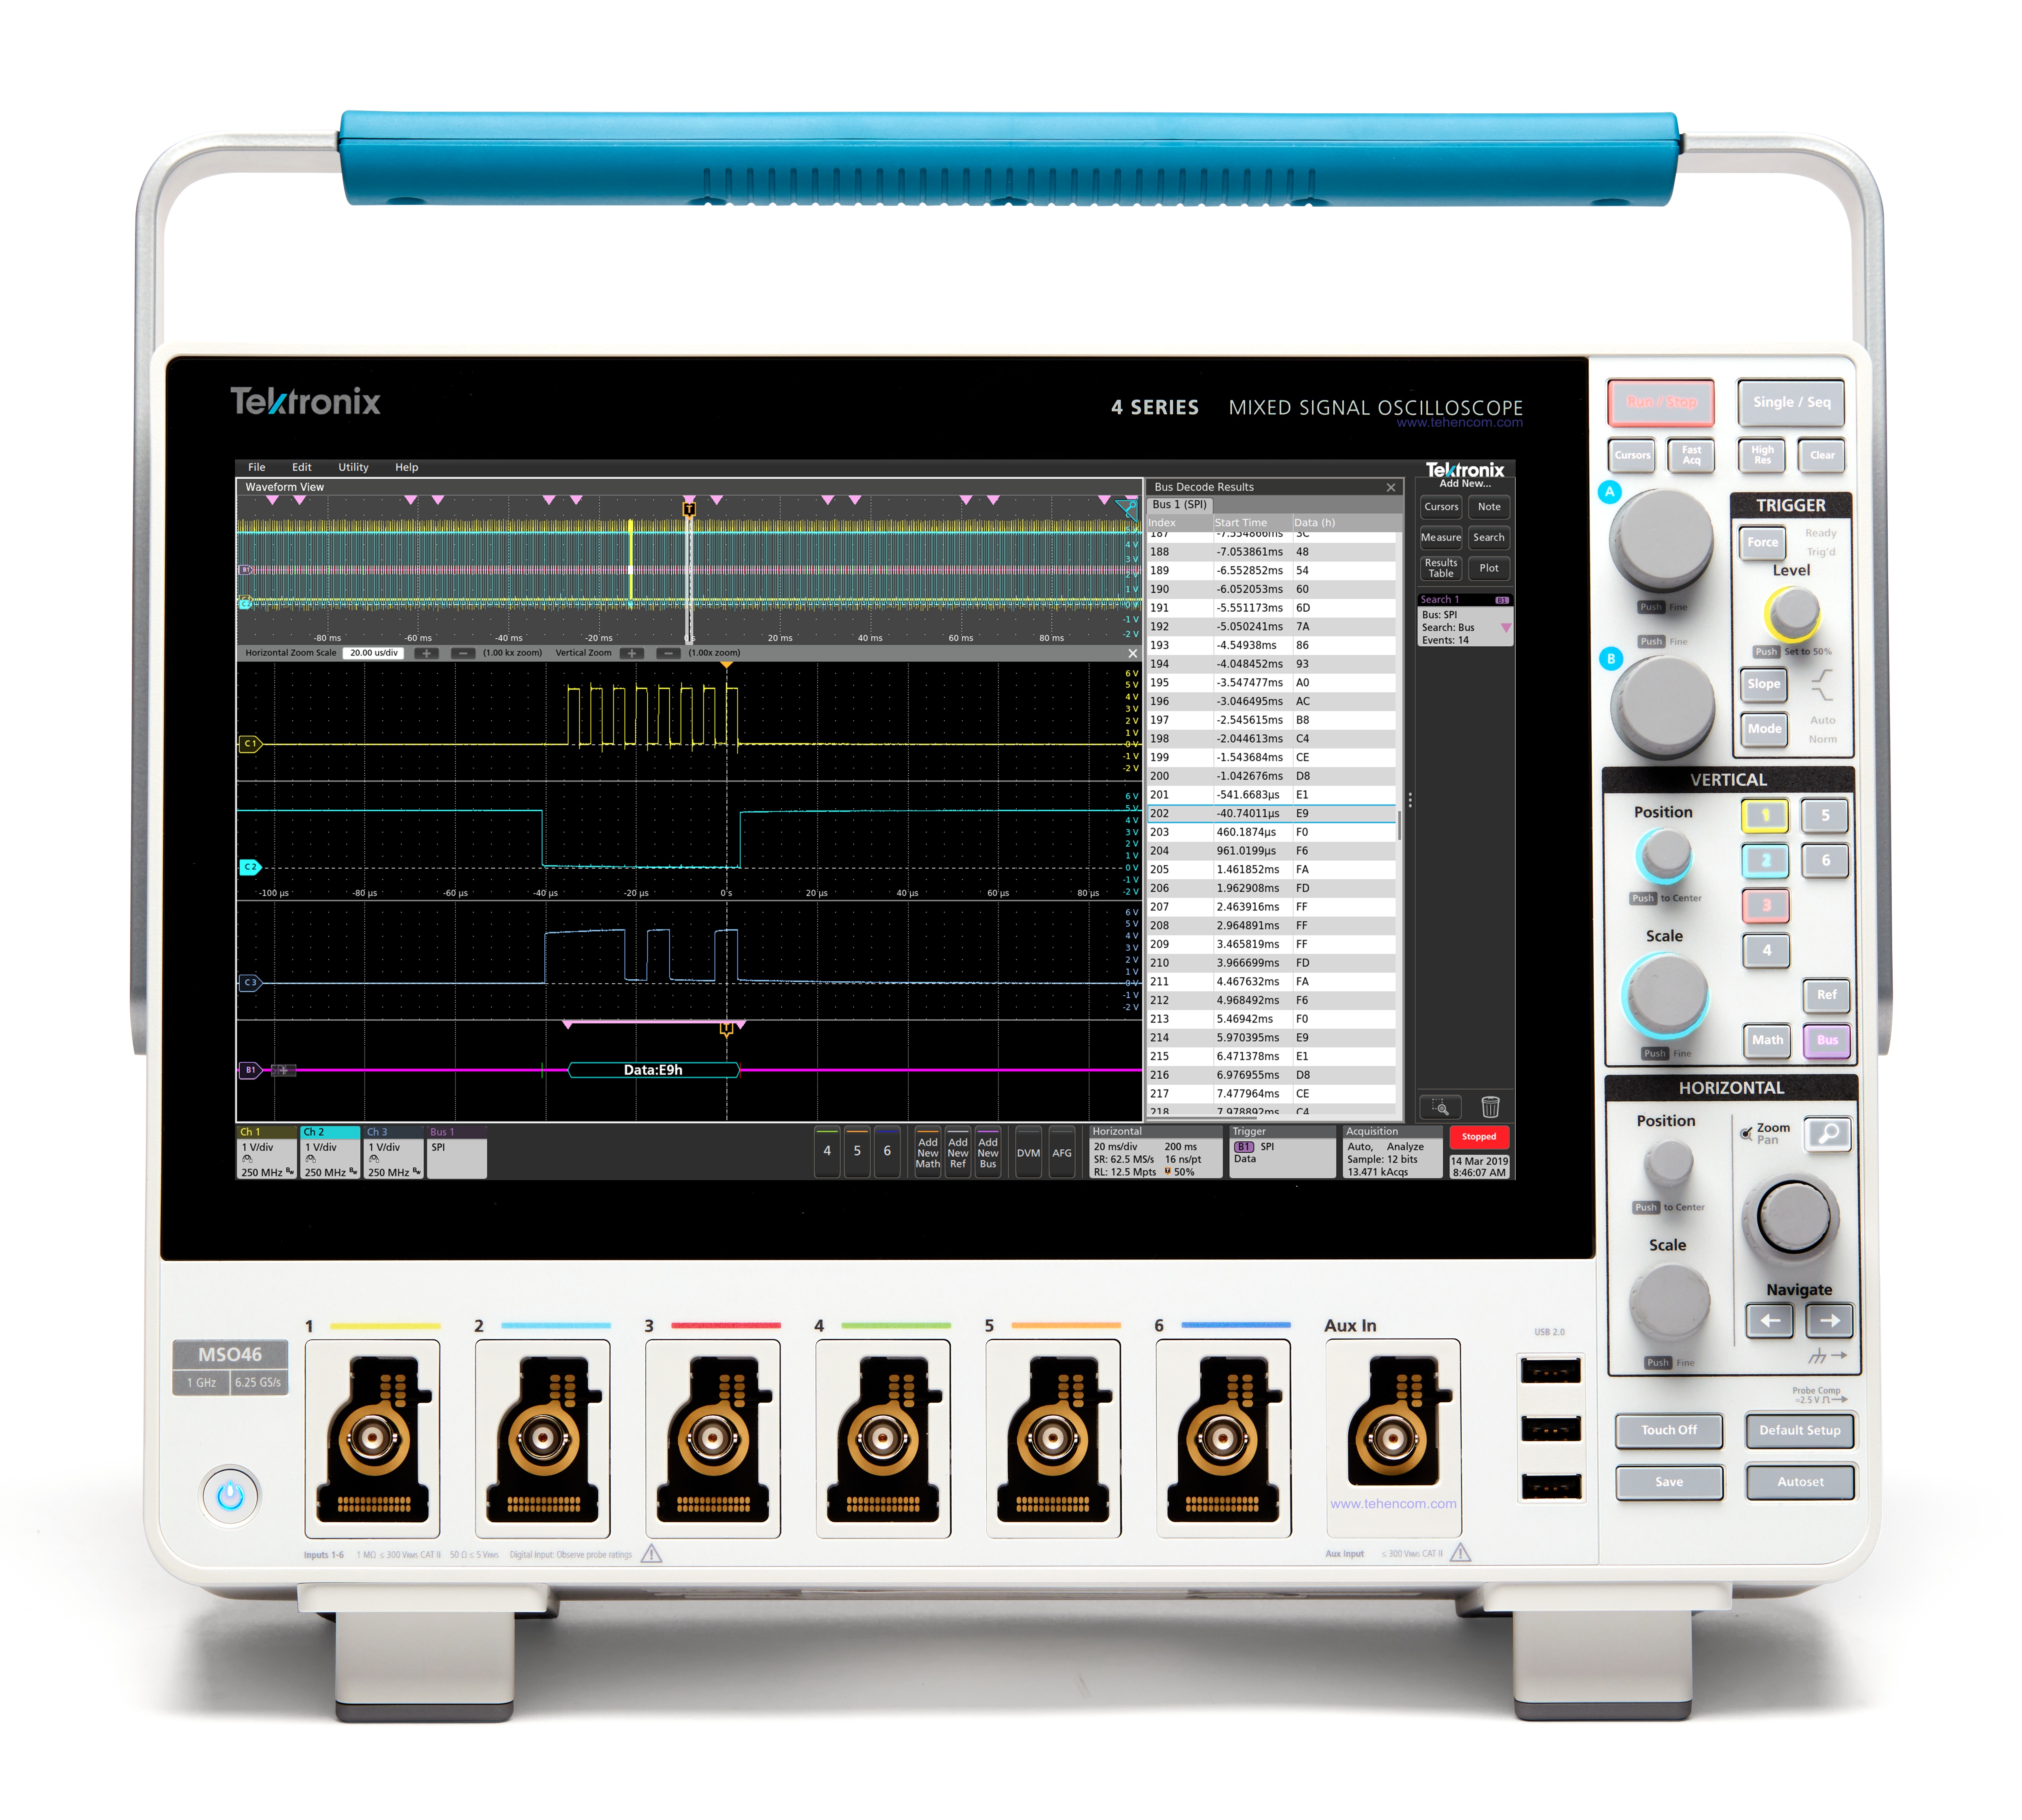 Tektronix MSO 4 Digital, Analog, and Mixed Signal Oscilloscopes (Models MSO44 and MSO46) from 200 MHz to 1.5 GHz